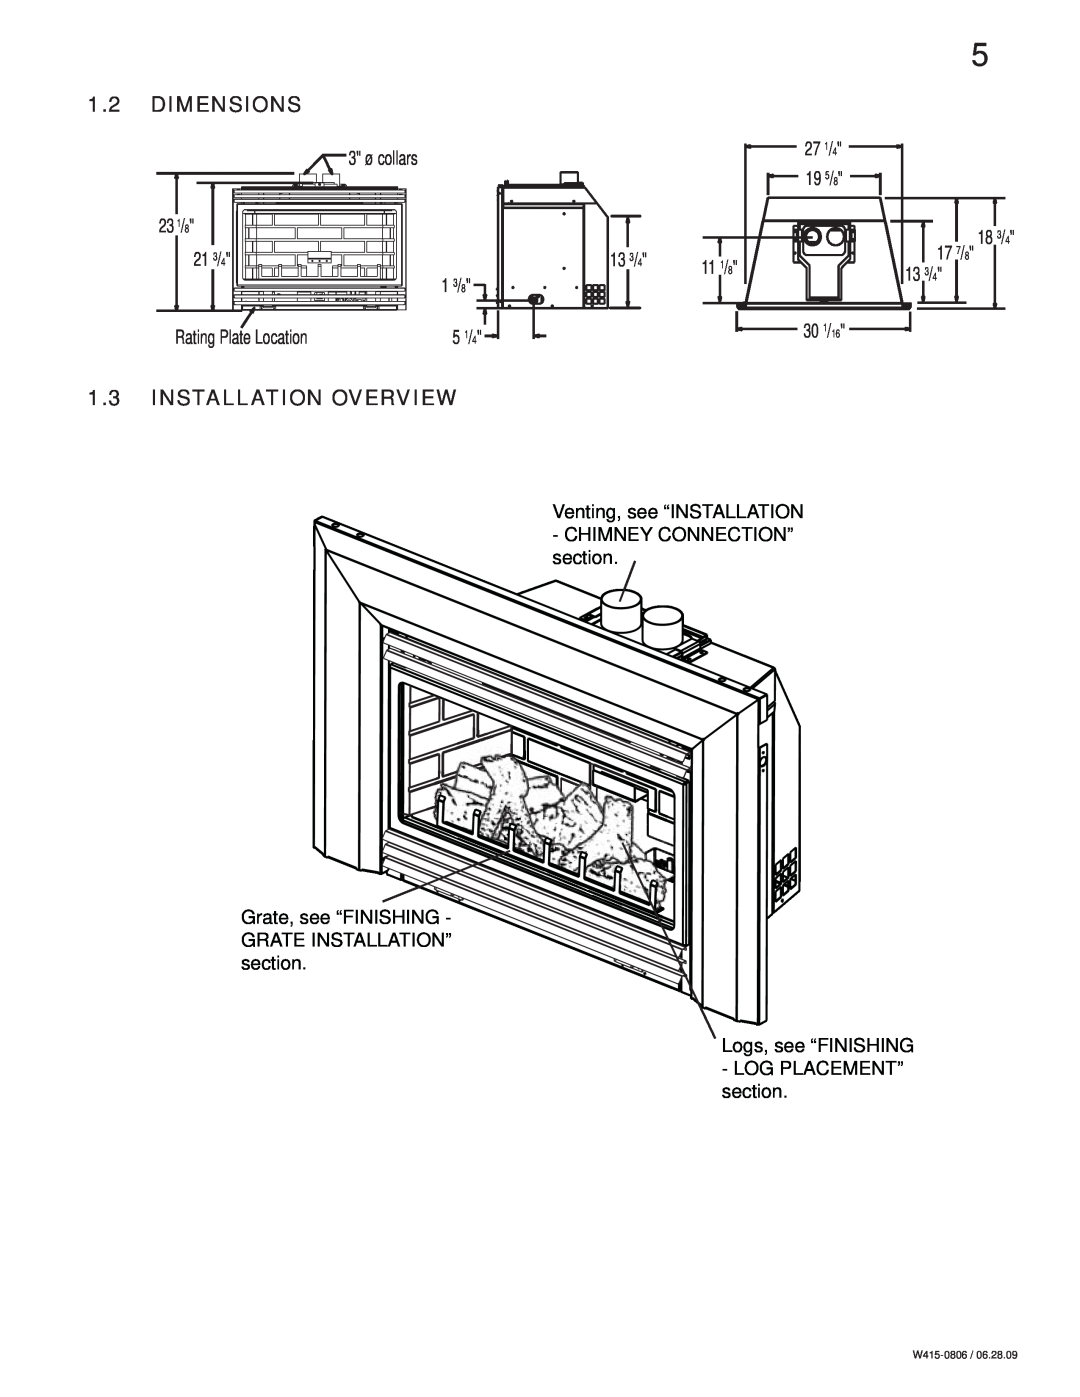 Napoleon Fireplaces GDI30 1.2DIMENSIONS, 1.3INSTALLATION OVERVIEW, 3 ø collars, 27 1/4, 19 5/8, 21 3/4, 1 3/8, 13 3/4 